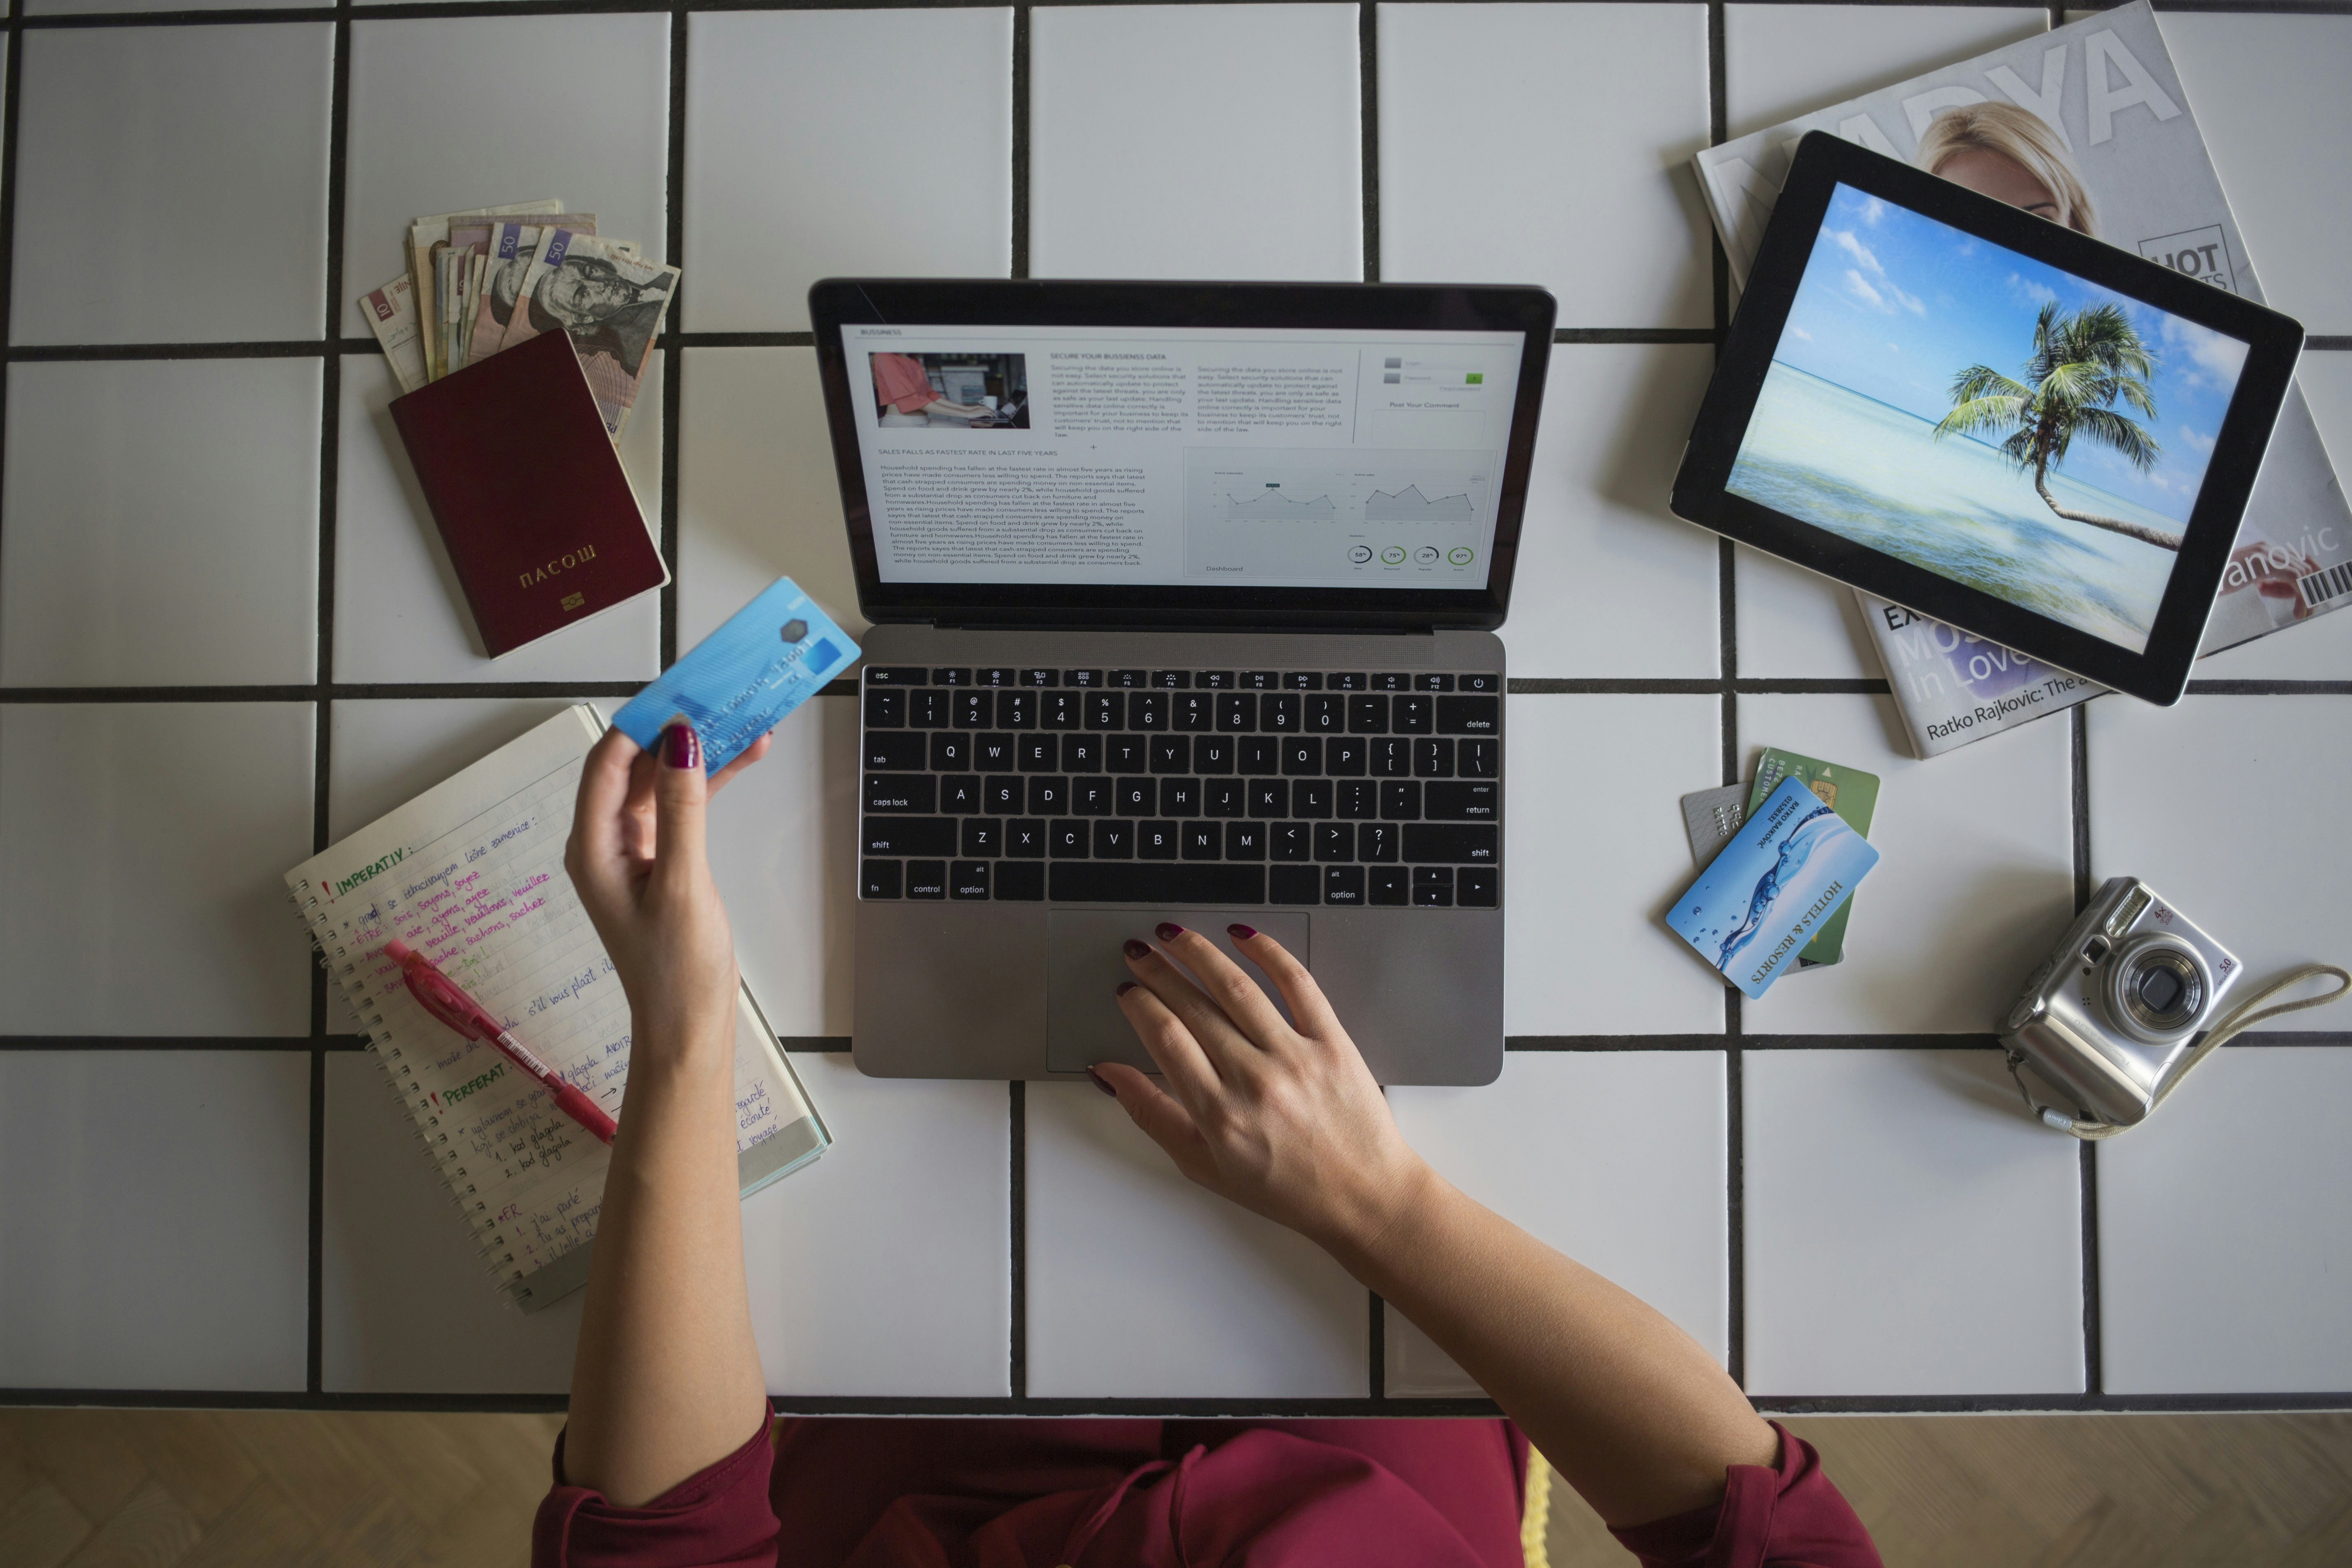 A top-down view of a person working at a laptop, planning their upcoming trip. Splayed out on the table around them is a passport, diary and foreign currency notes.